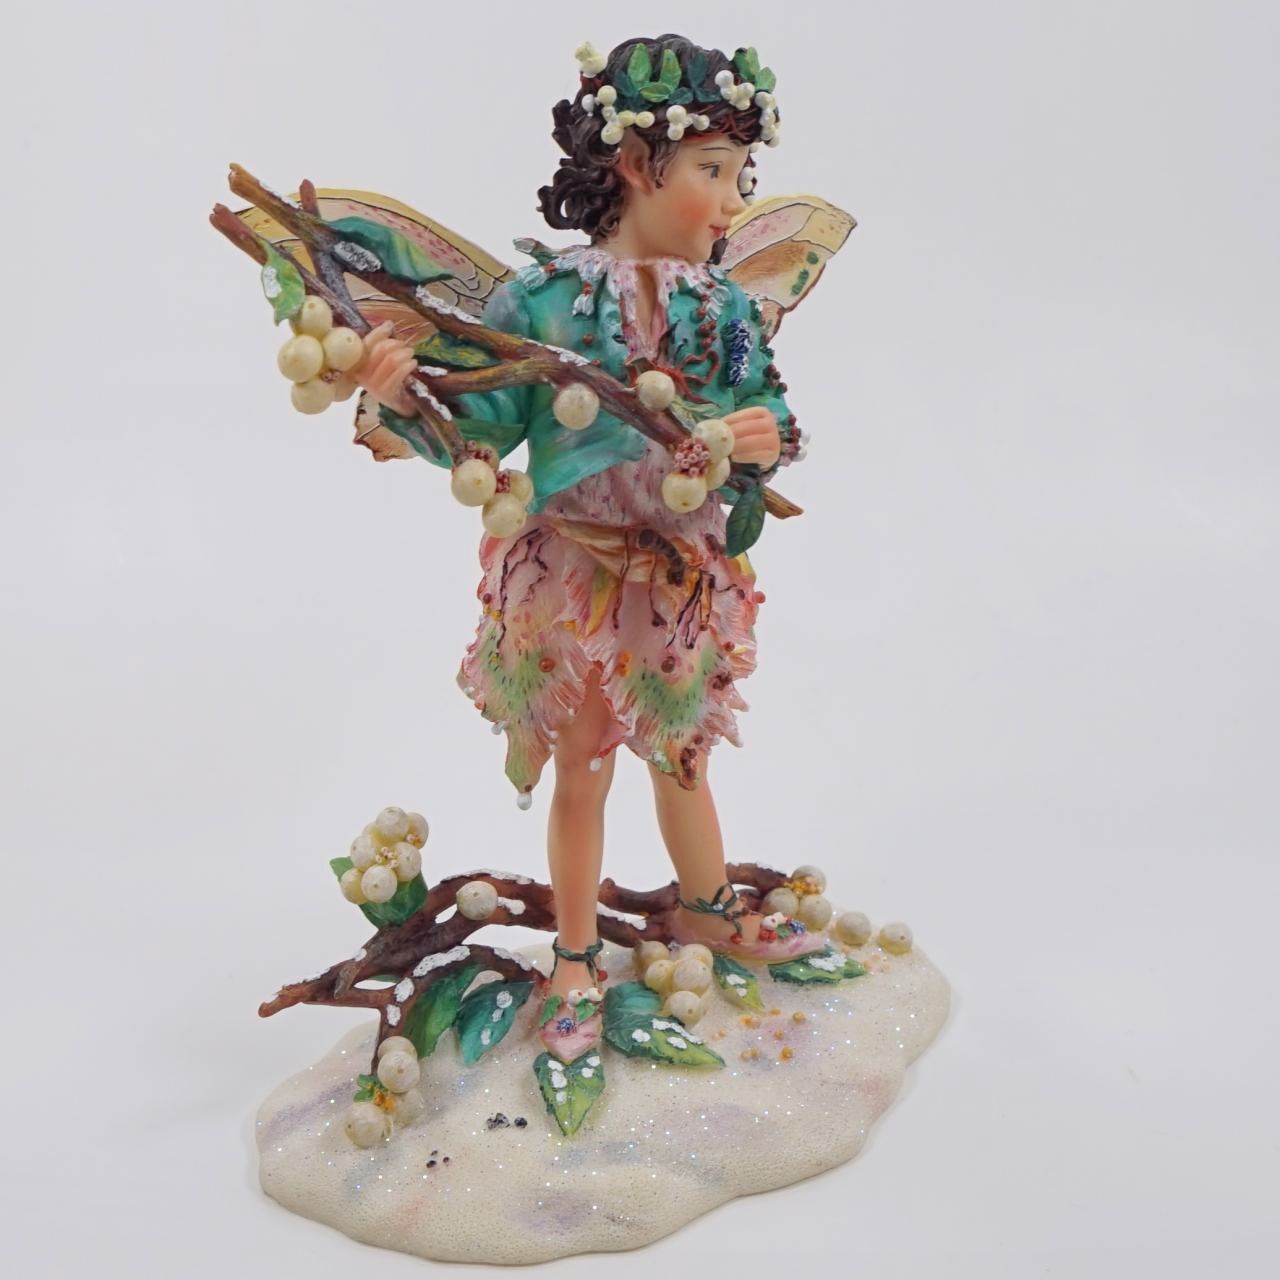 Crisalis Collection★ The Snowberry Faerie (1-4103) Standard